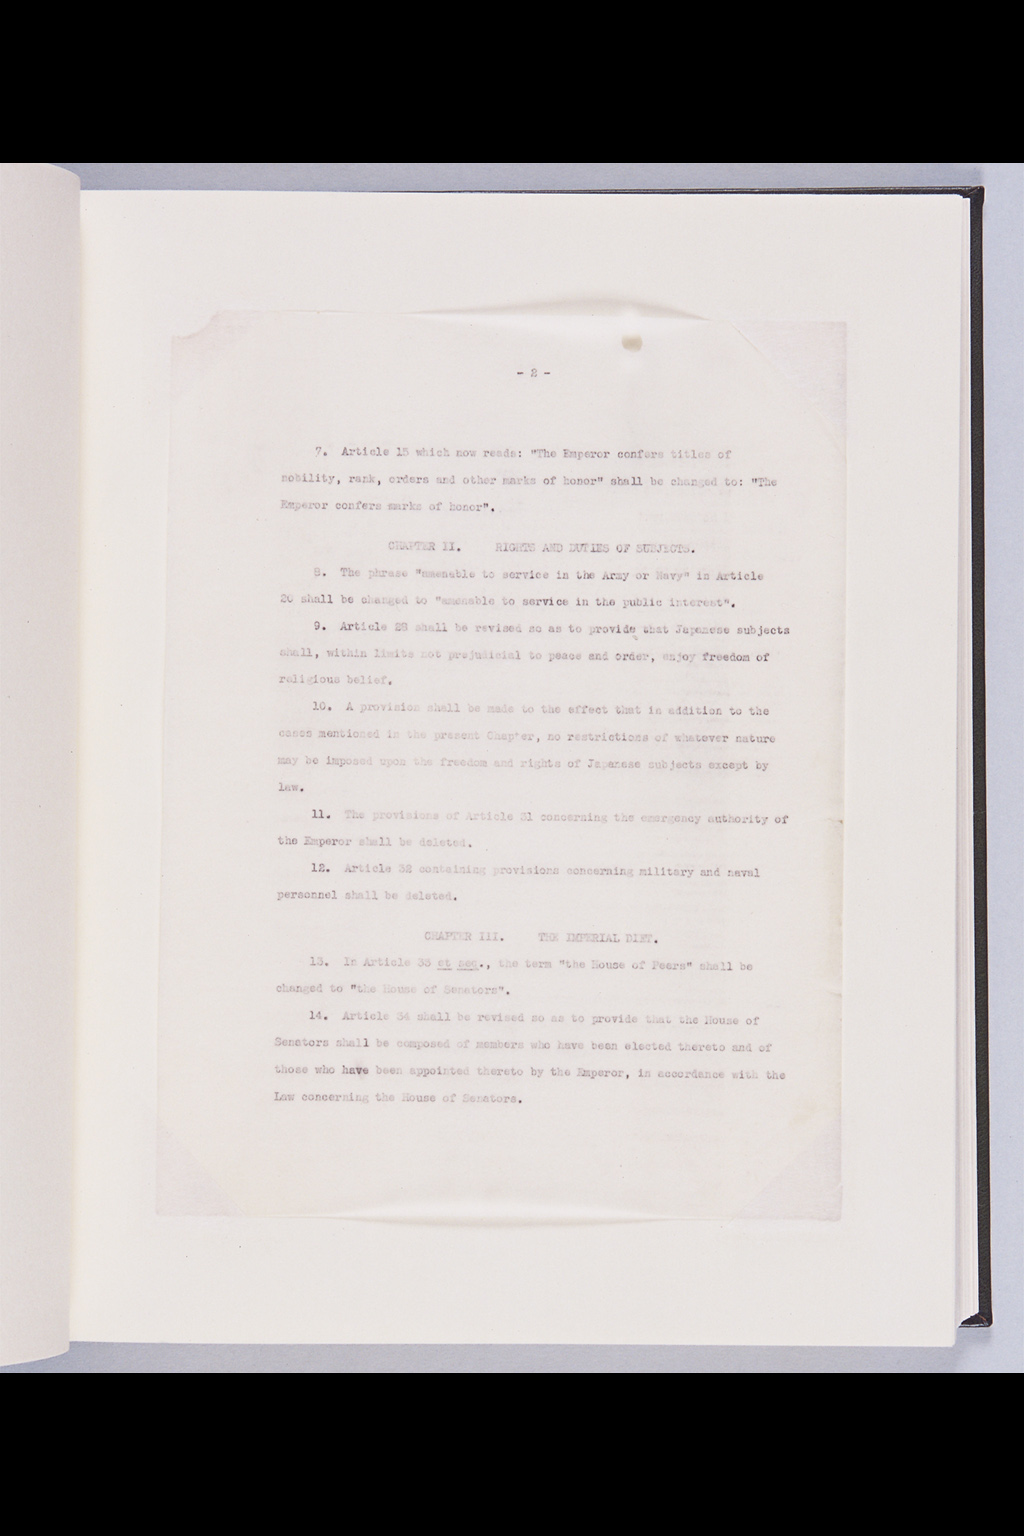 [Alfred Hussey Papers; Constitution File No. 1](Larger image)